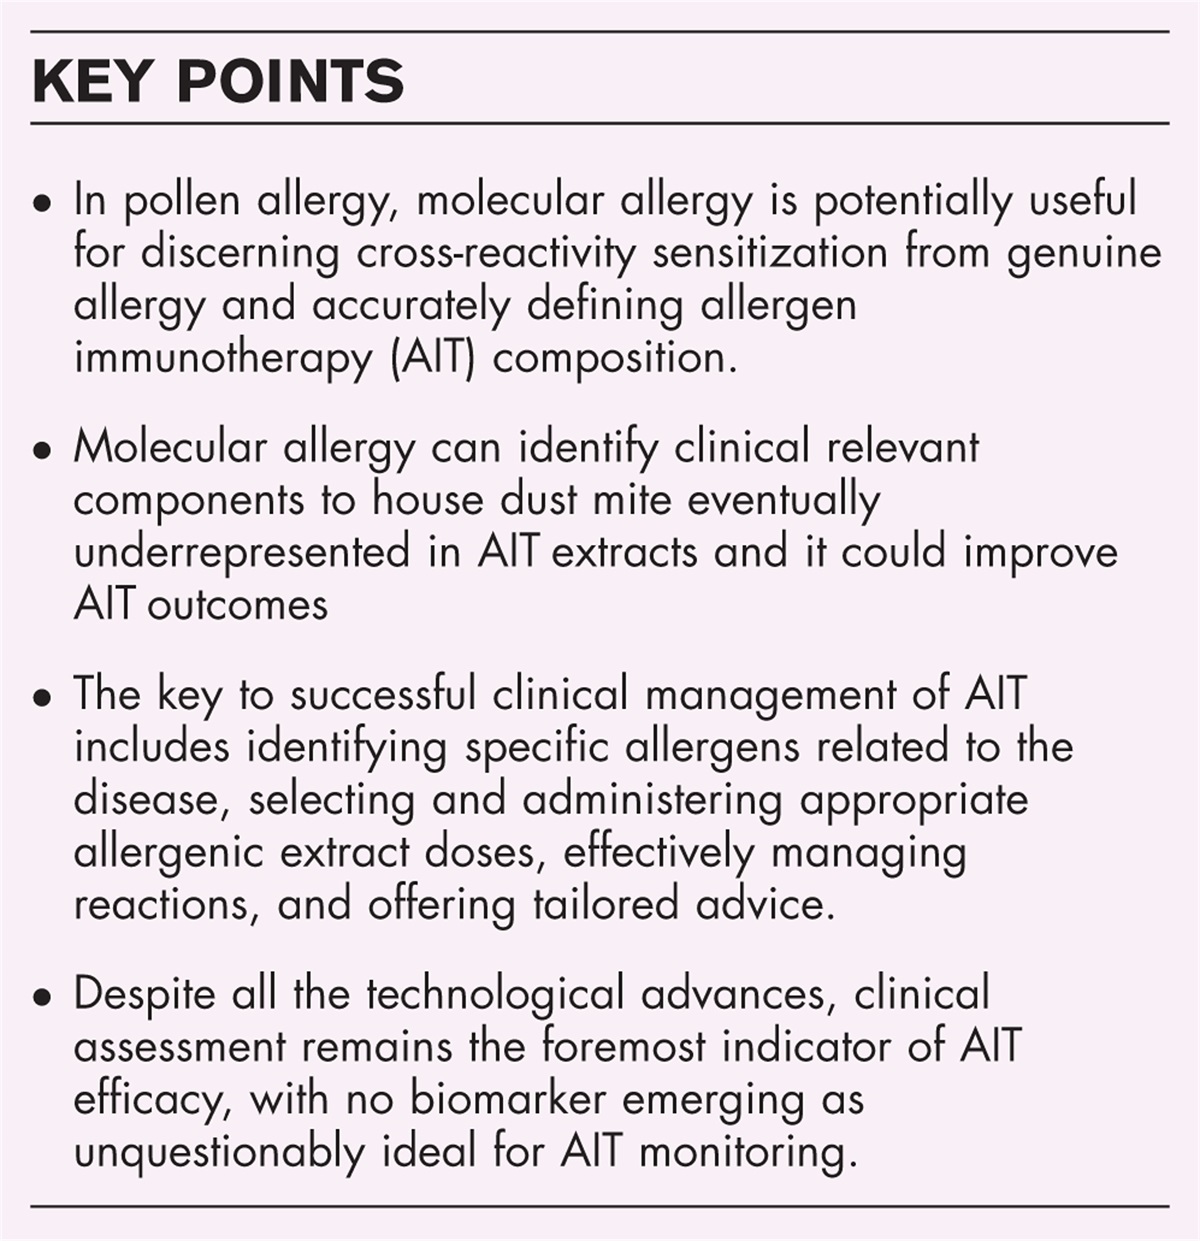 Is allergen immunotherapy a model of personalized treatment in pediatric respiratory allergy?